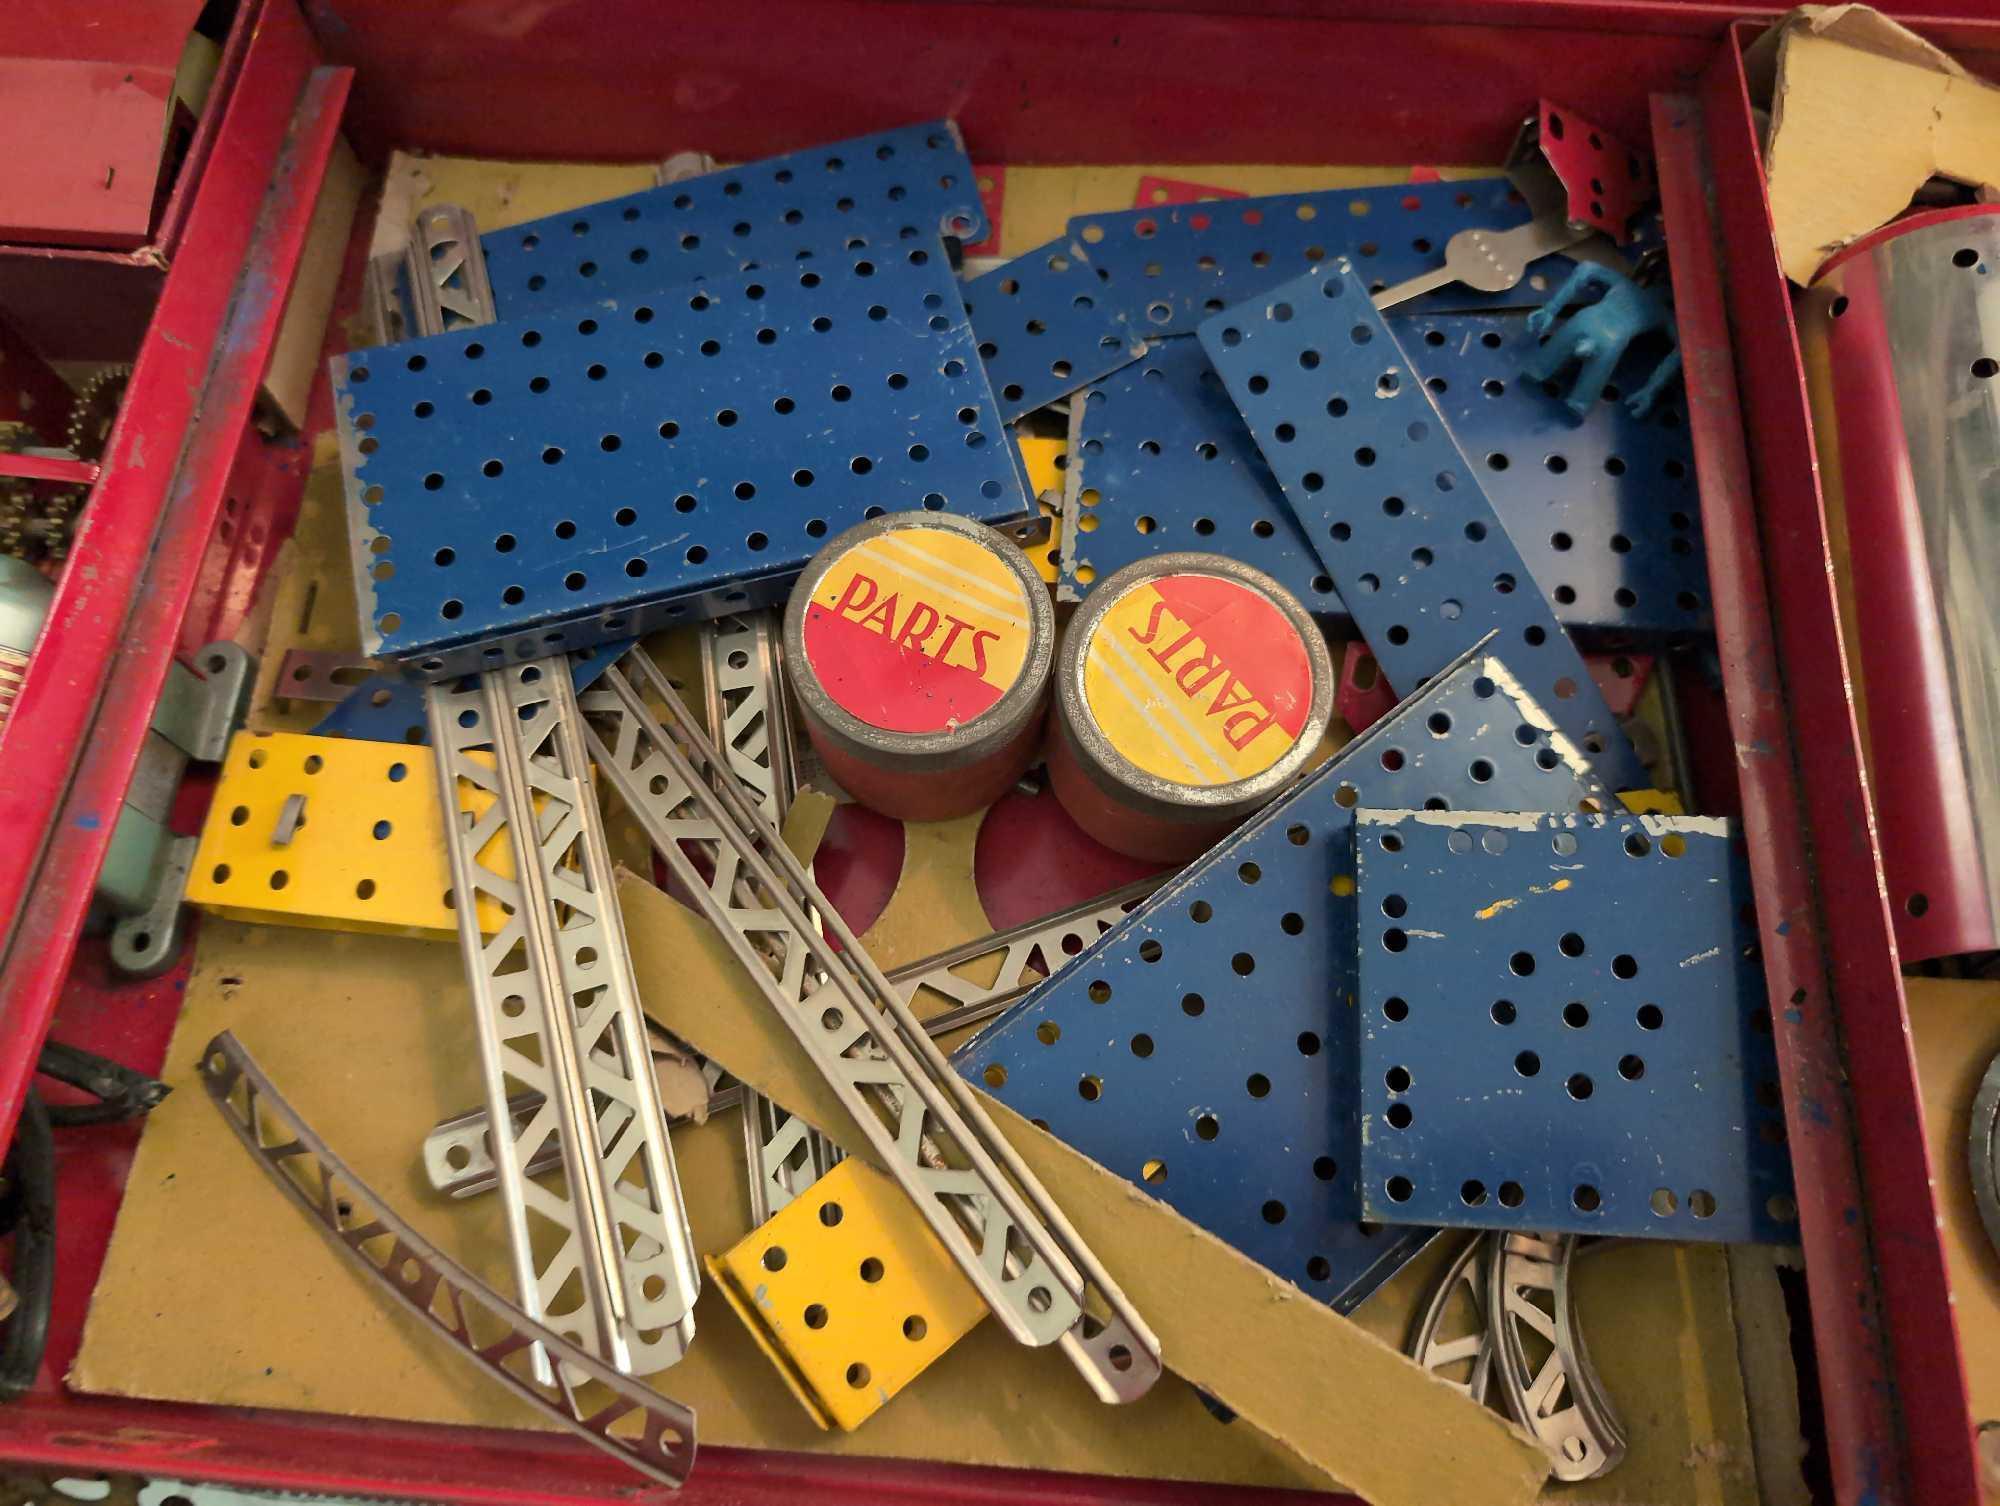 (LR) VINTAGE A.C. GILBERT COMPANY NO. 8-1/2 ALL-ELECTRIC ERECTOR SET. SEEMS TO BE IN DECENT